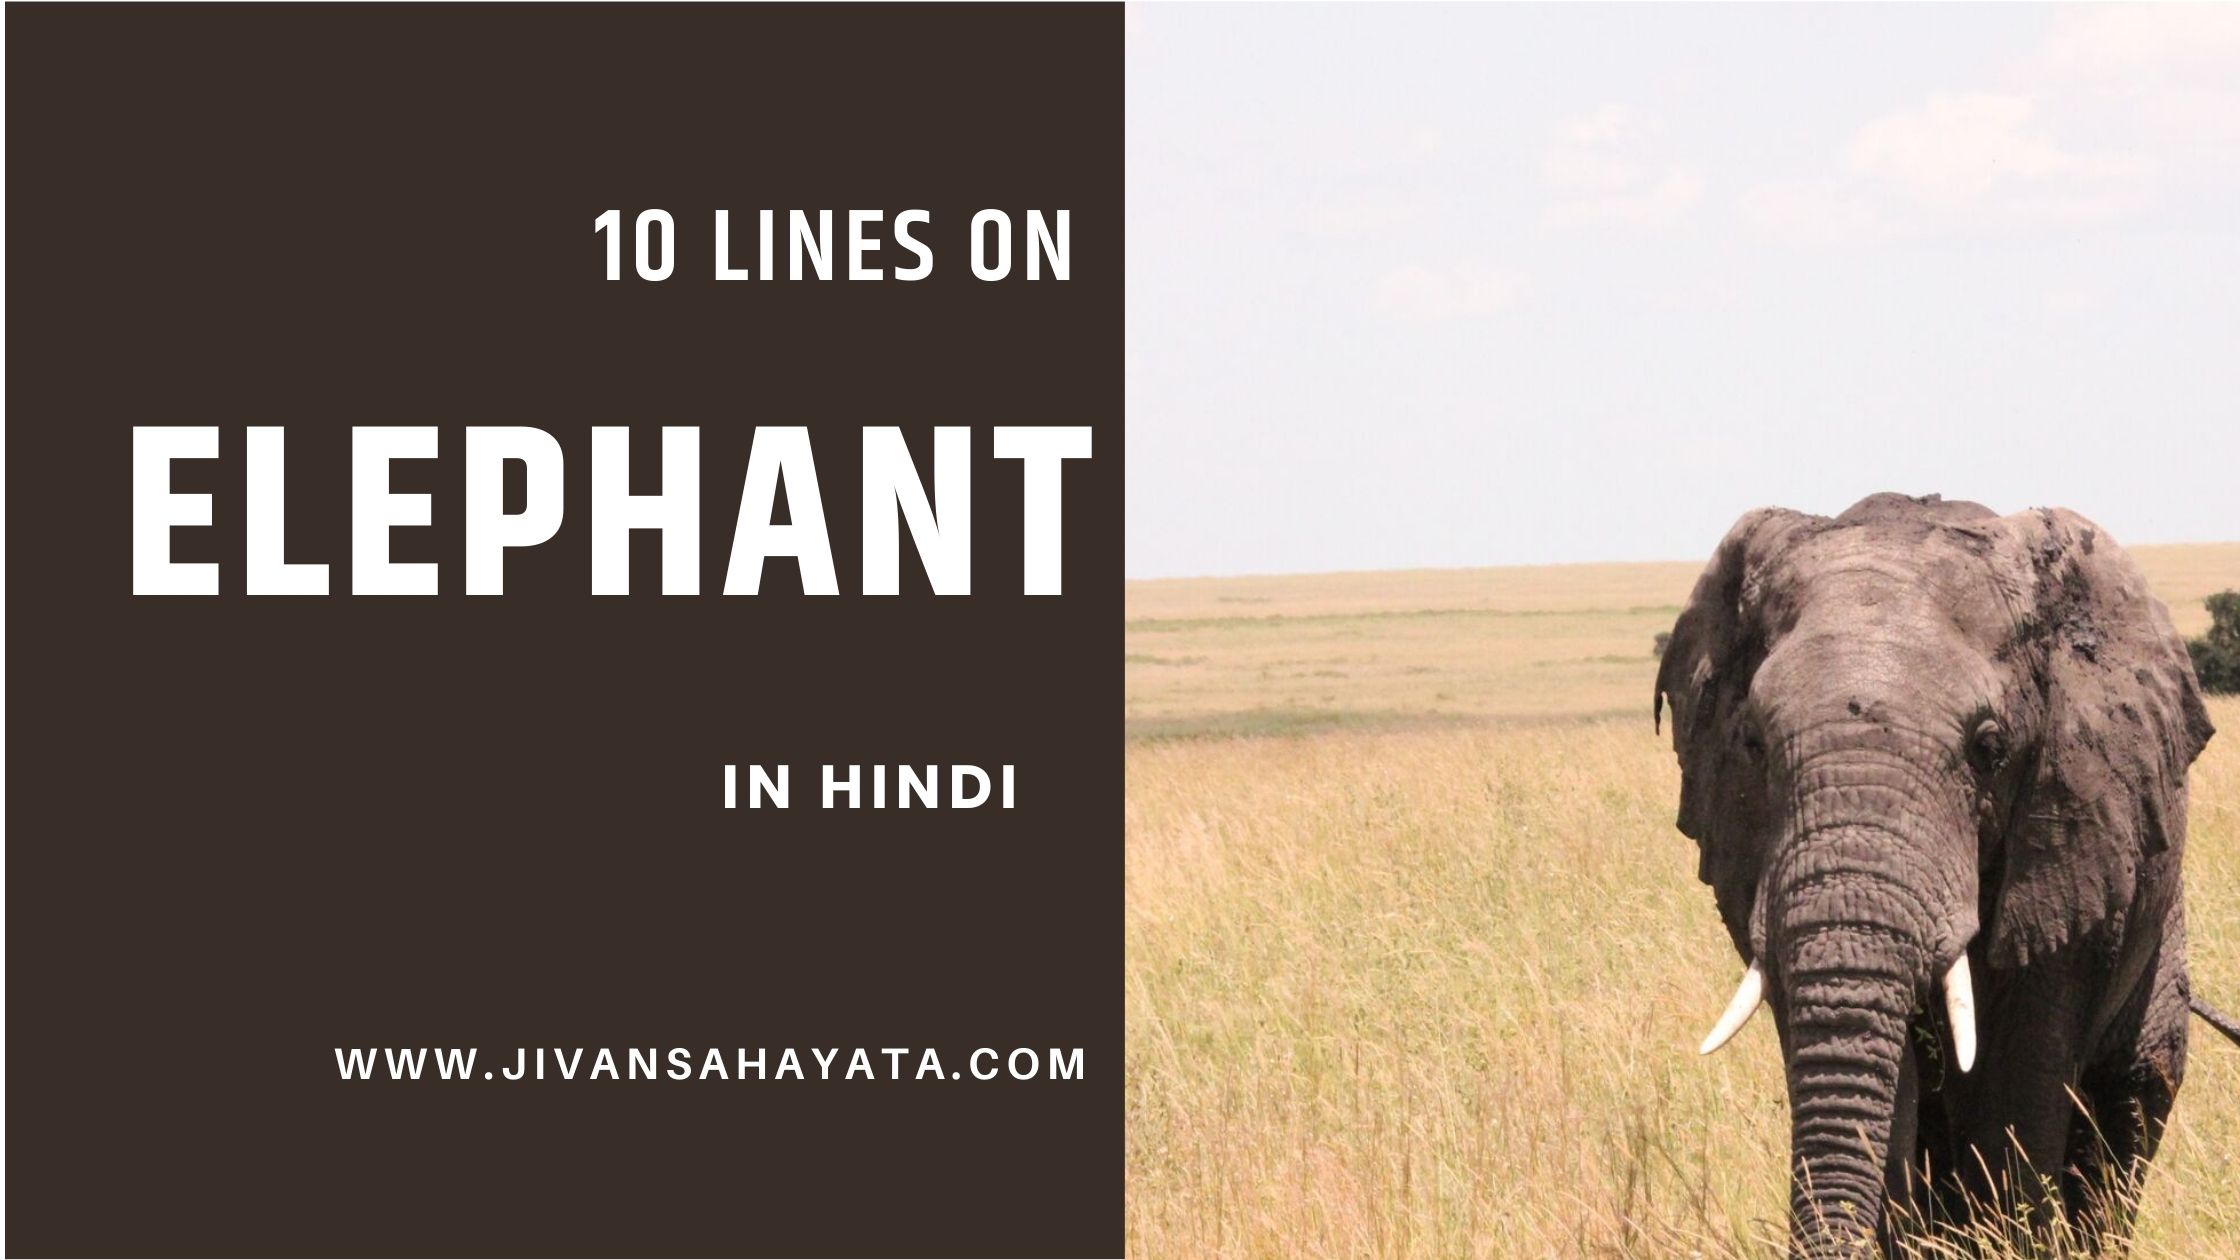 10 lines on elephant in Hindi